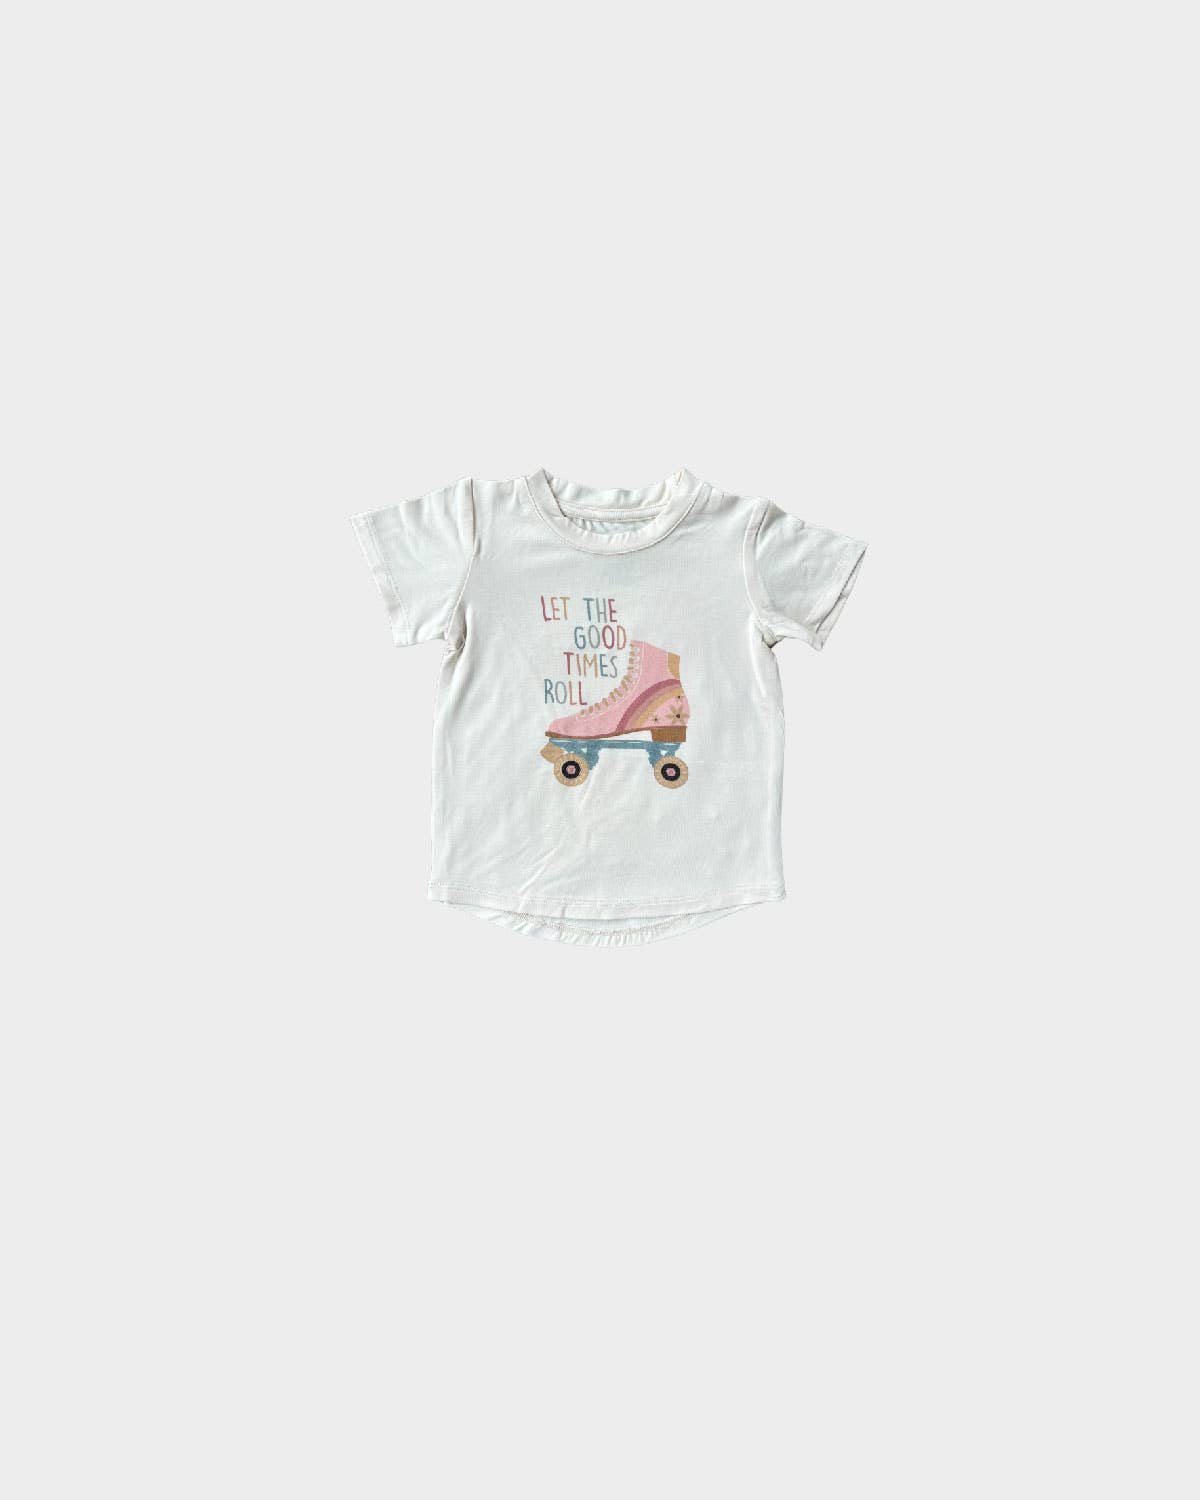 babysprouts clothing company - S24 D1: Girl's Bamboo Tee in Let the Good Times Roll